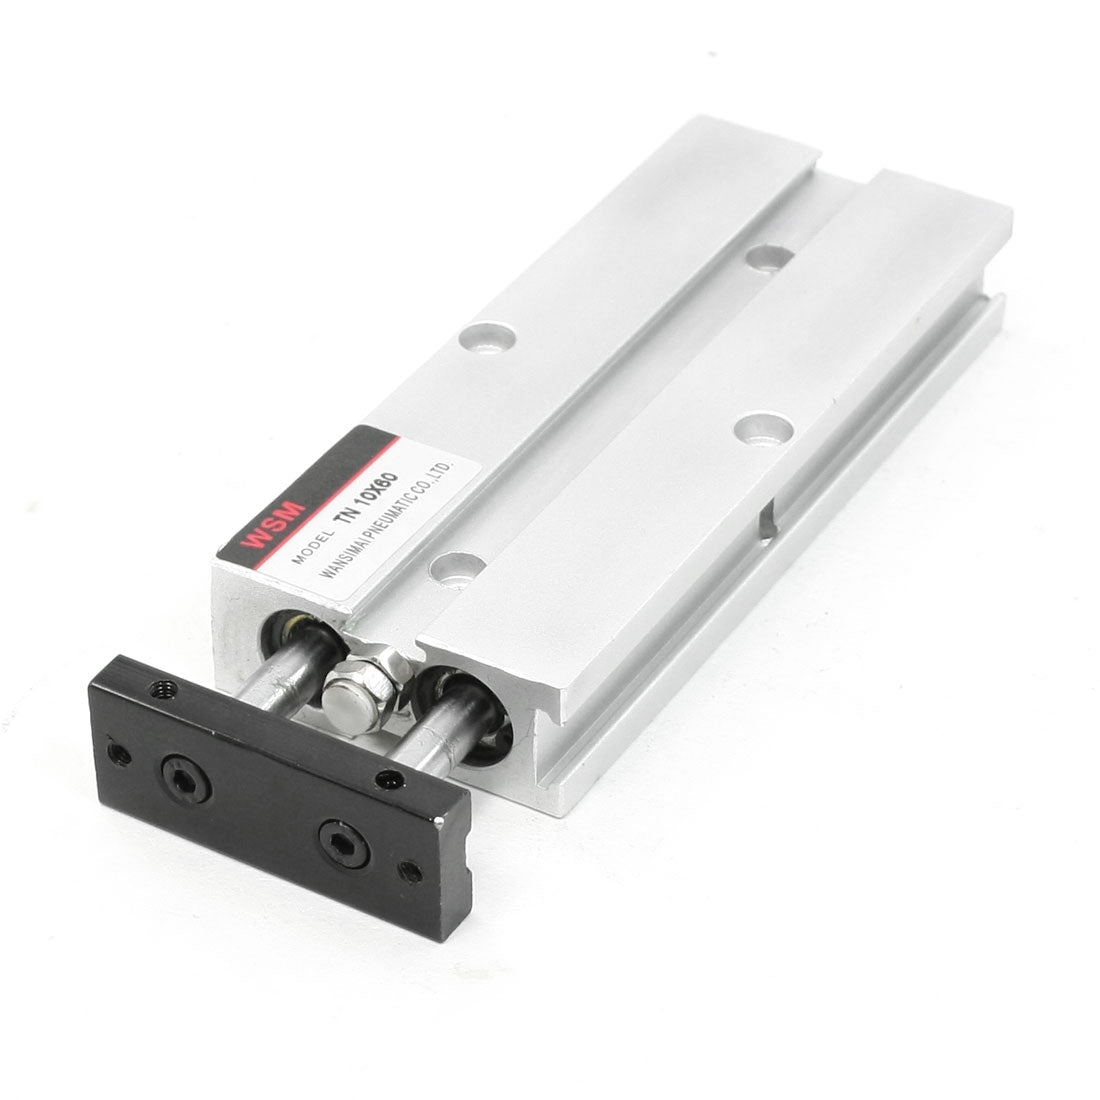 uxcell Uxcell TN10x60 Alloy Double-shaft Slide Guiding Pneumatic Air Cylinder